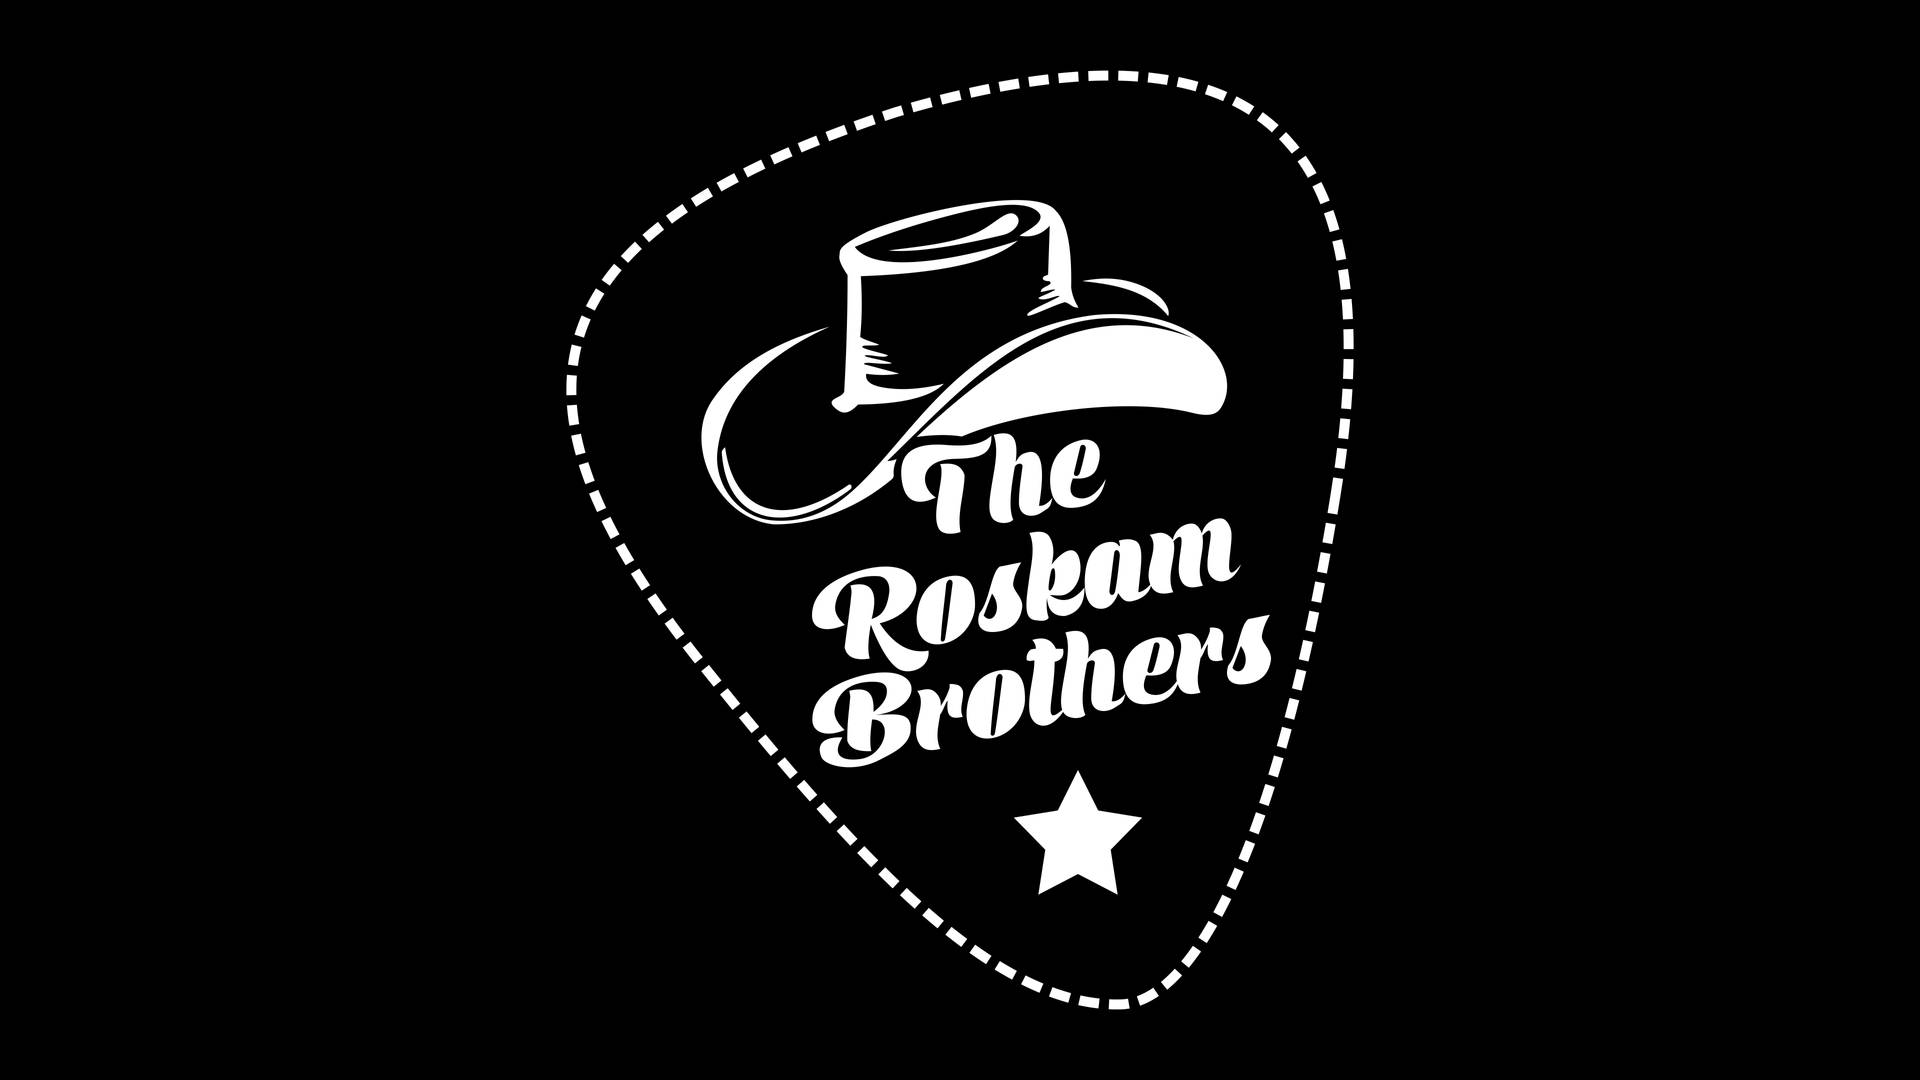 Far Cry 5 The Roskam Brothers Logo Background